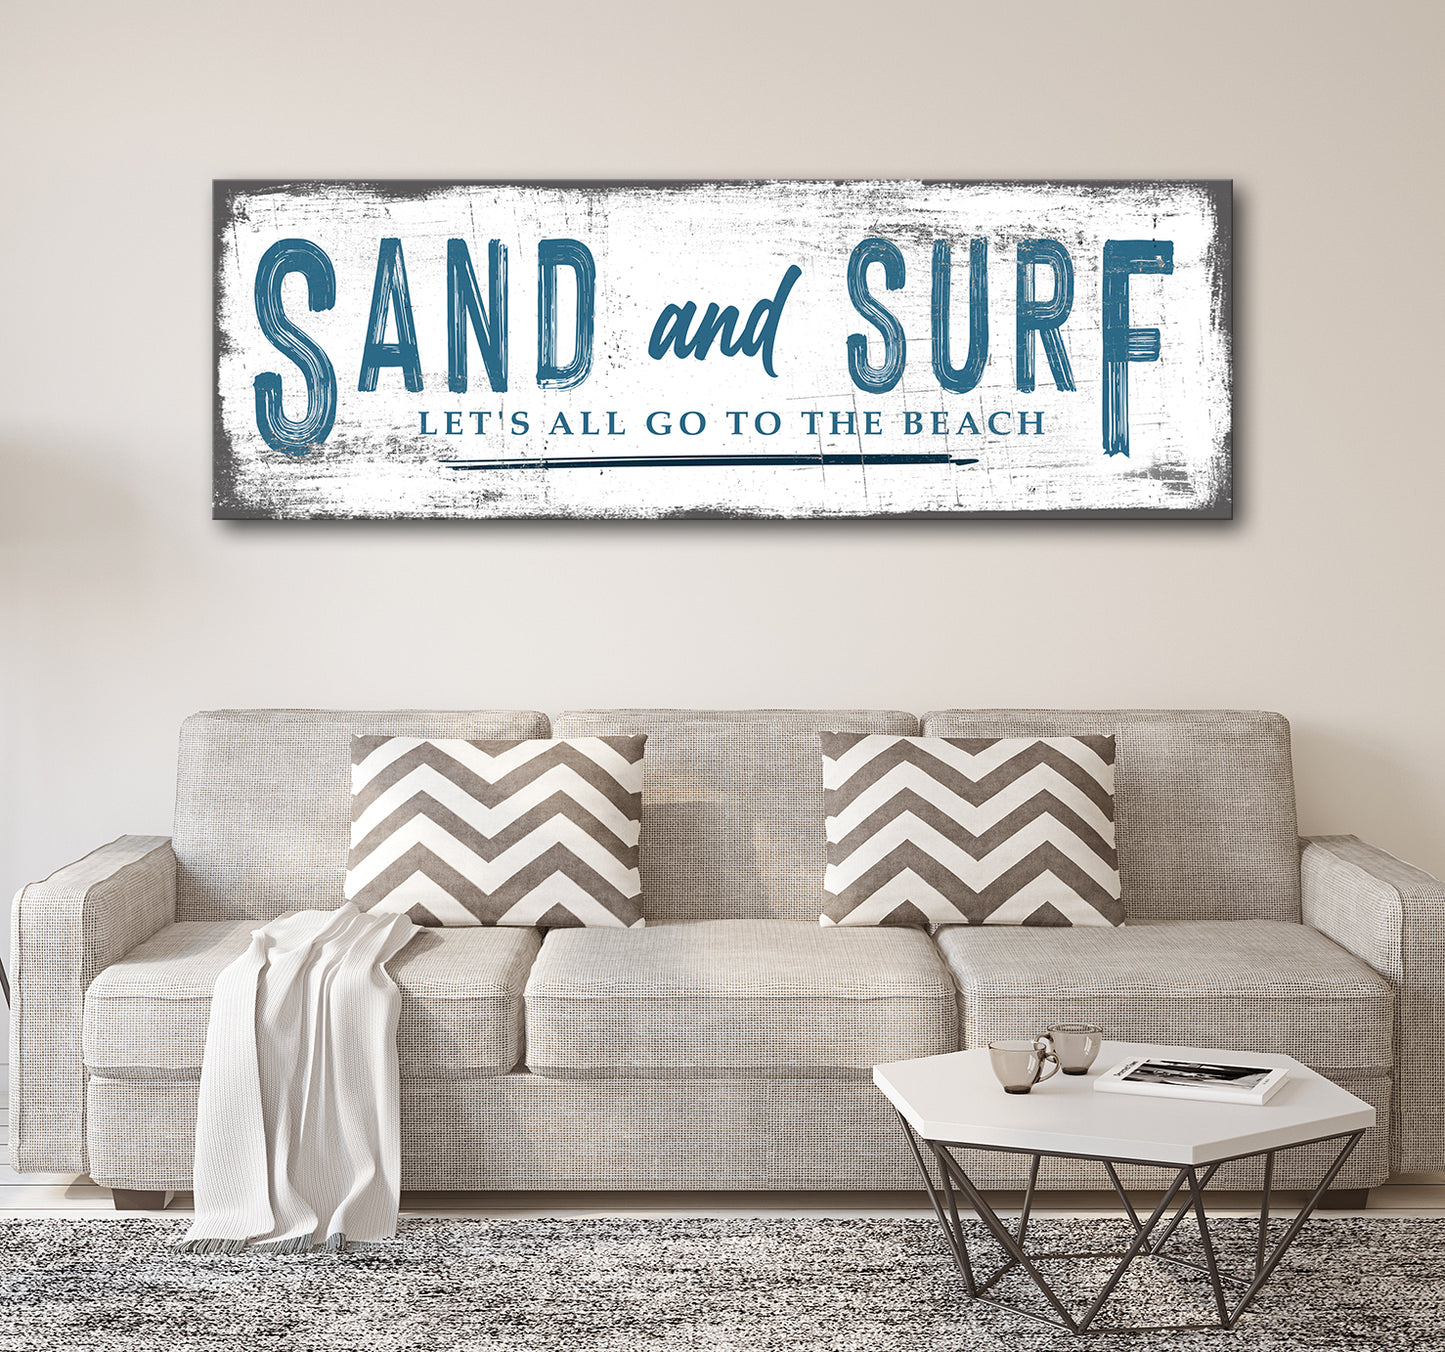 Sand and Surf Sign - Image by Tailored Canvases